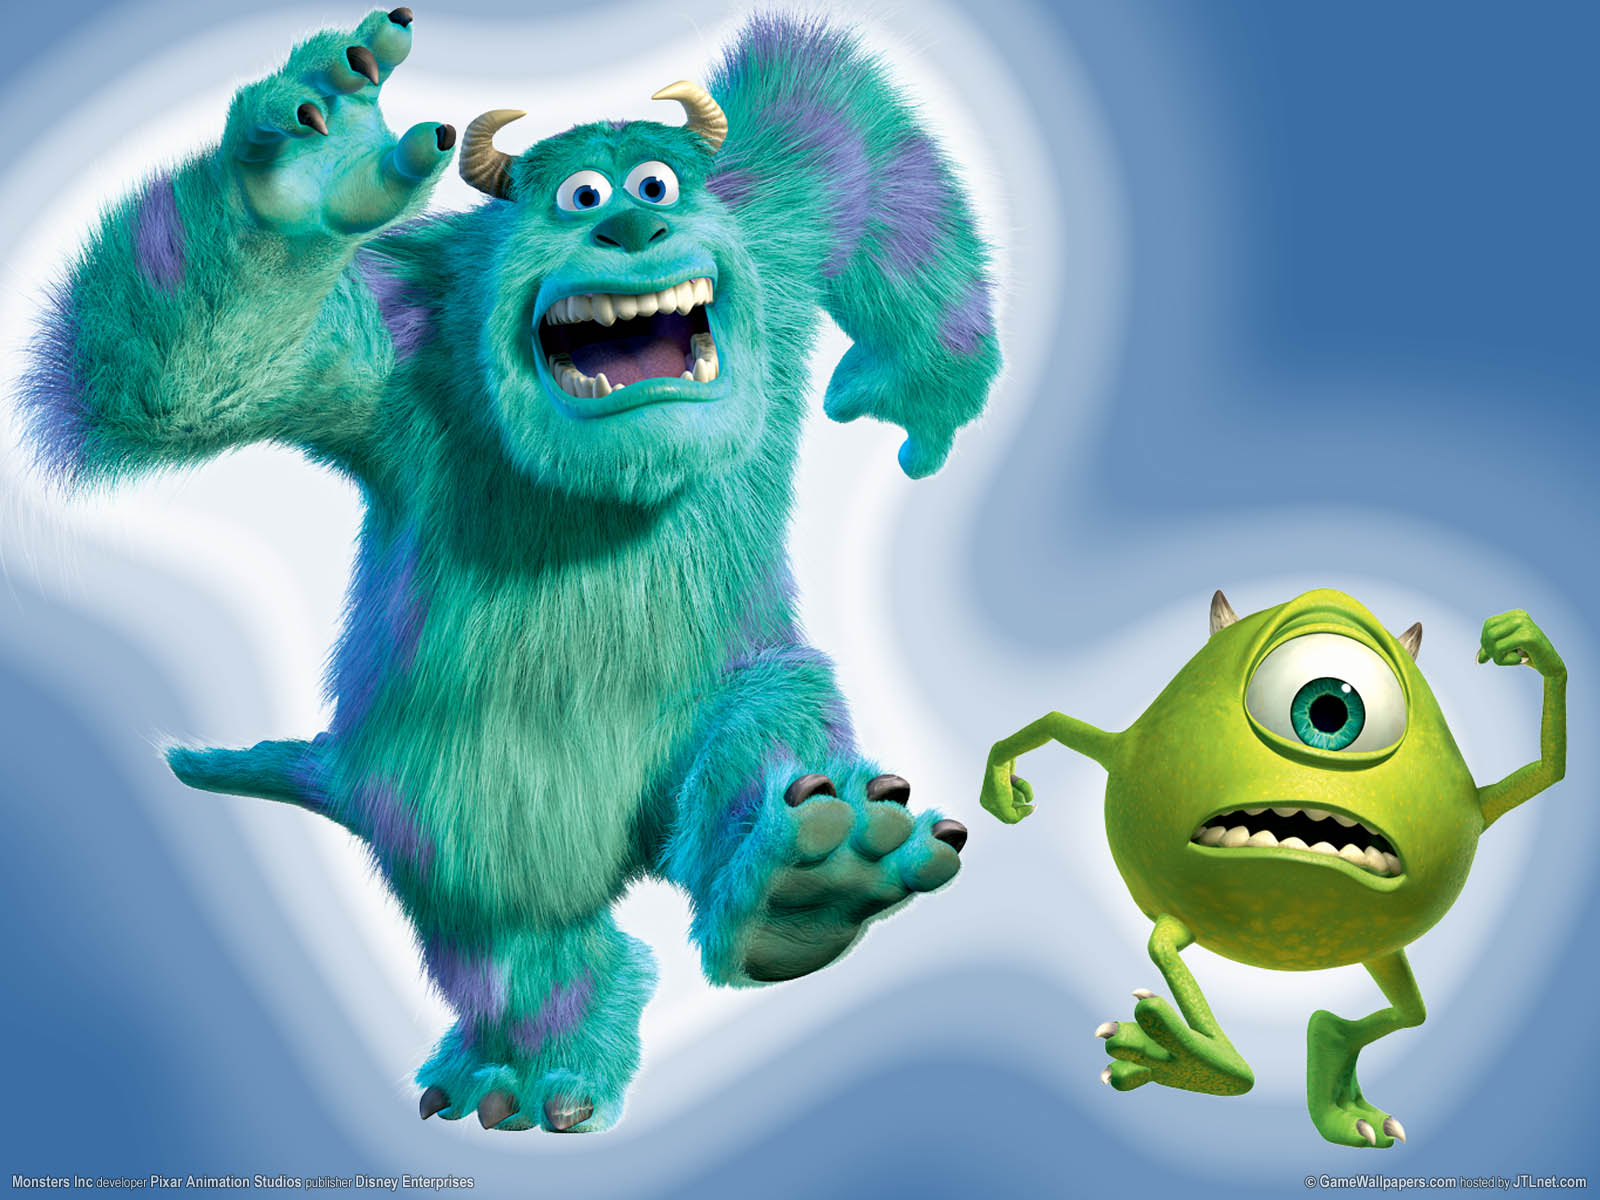 Monsters Inc achtergrond 01 1600x1200